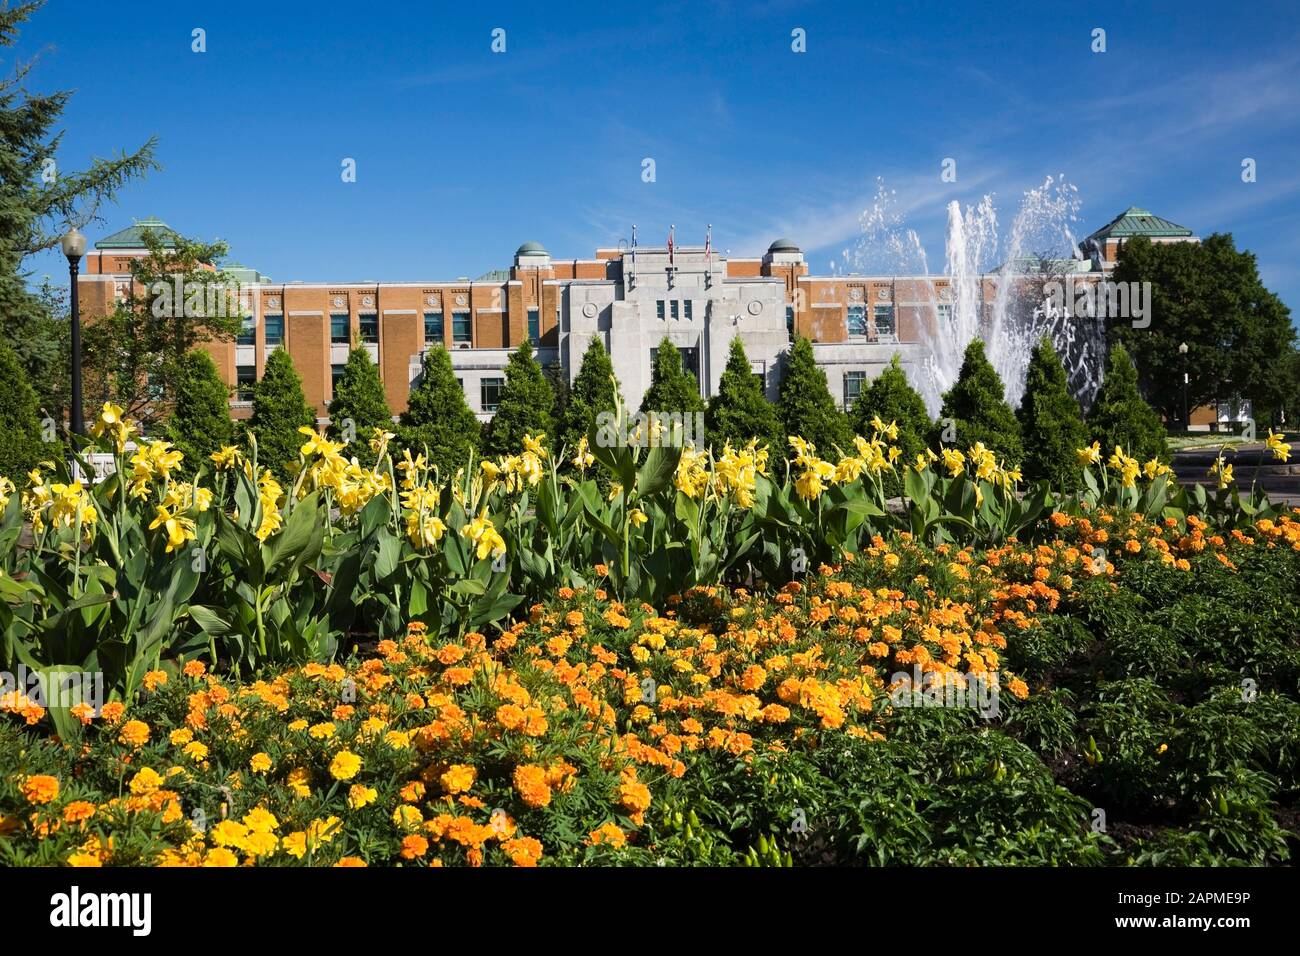 Borders planted with deep orange Tagetes 'Zenith' - Marigold, yellow Canna - Indian Shot flowers with administrative building in background in summer Stock Photo